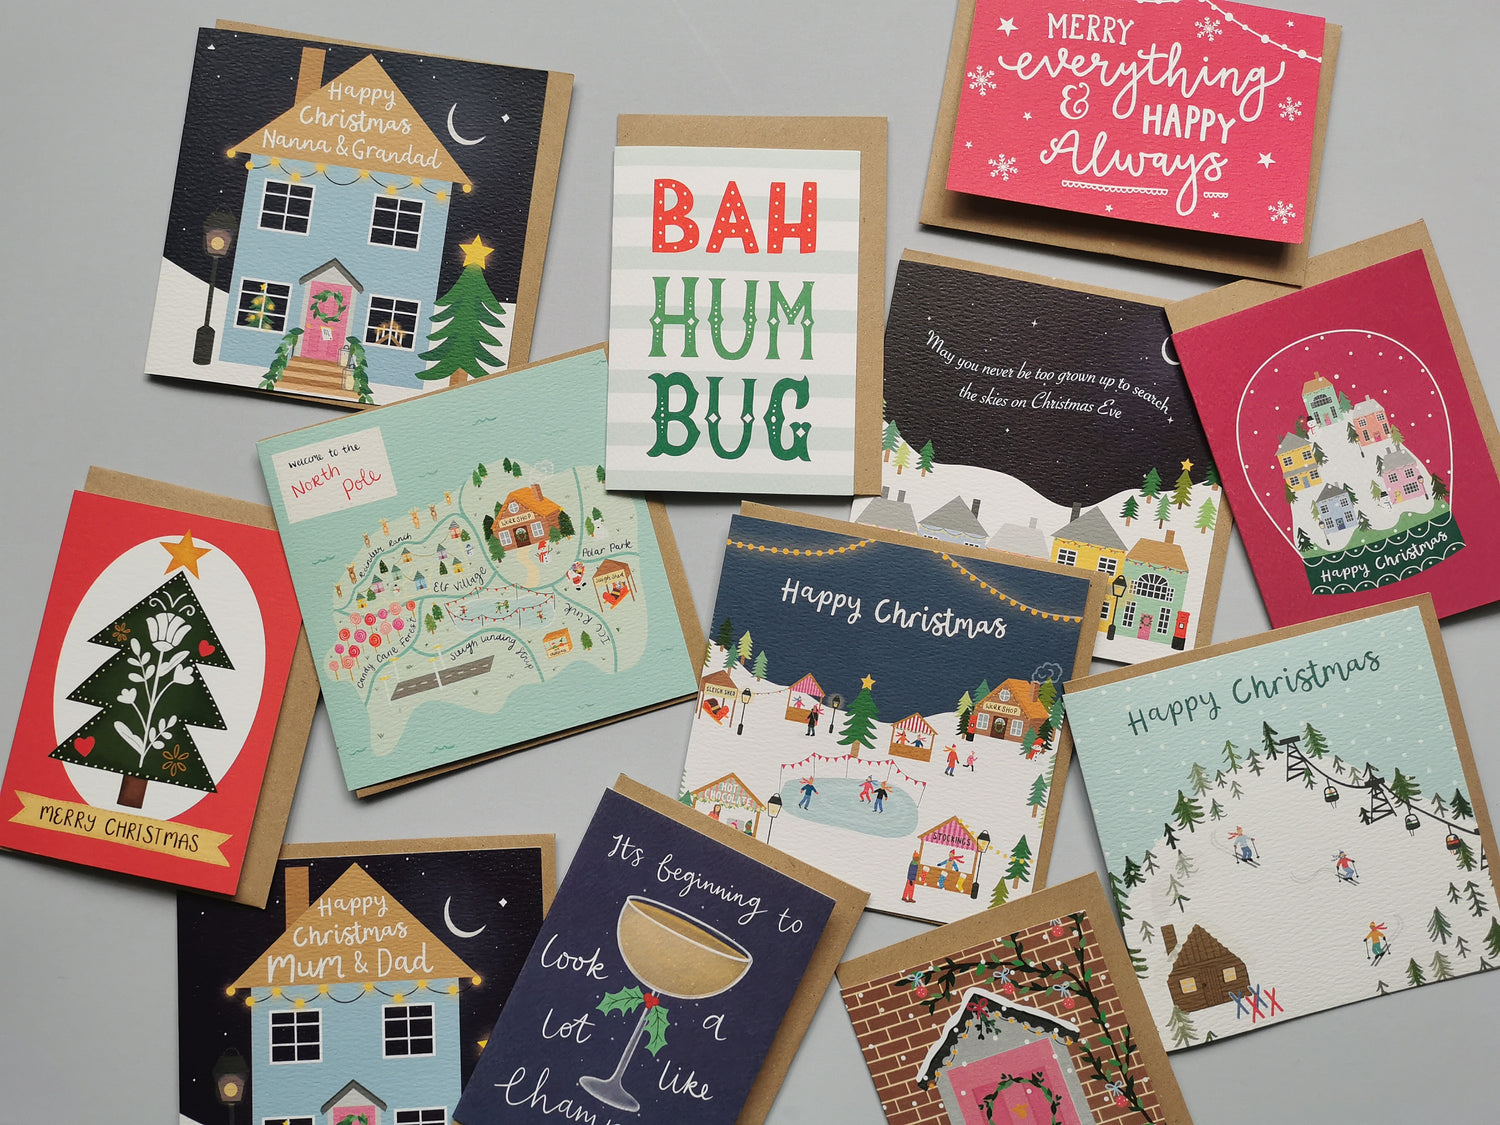 A flat lay of christmas greetings cards containing different illustrations.